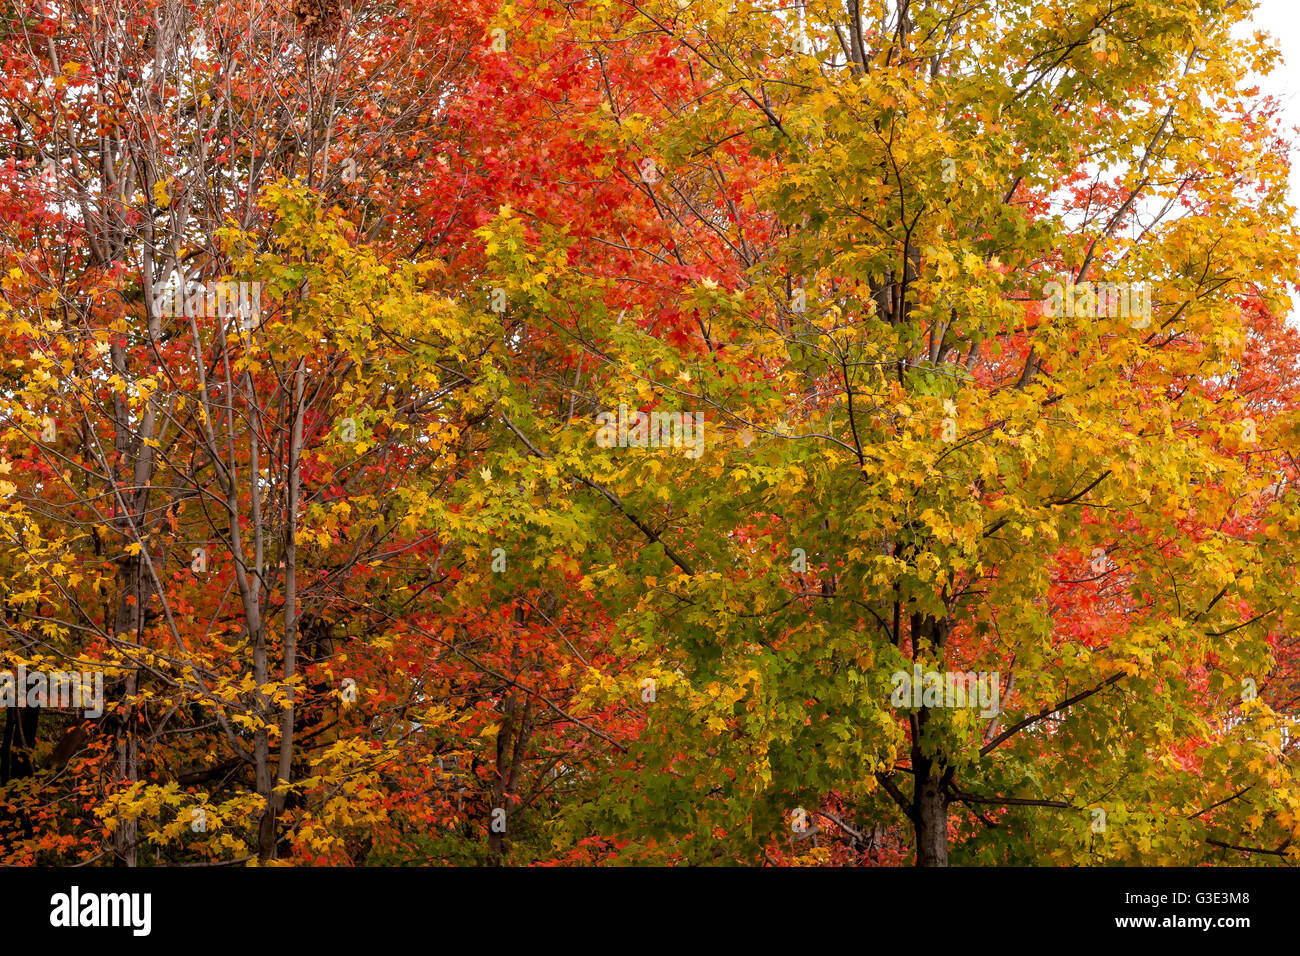 Autumn leaves on trees,colourful red yellow and golden leaves Stock Photo